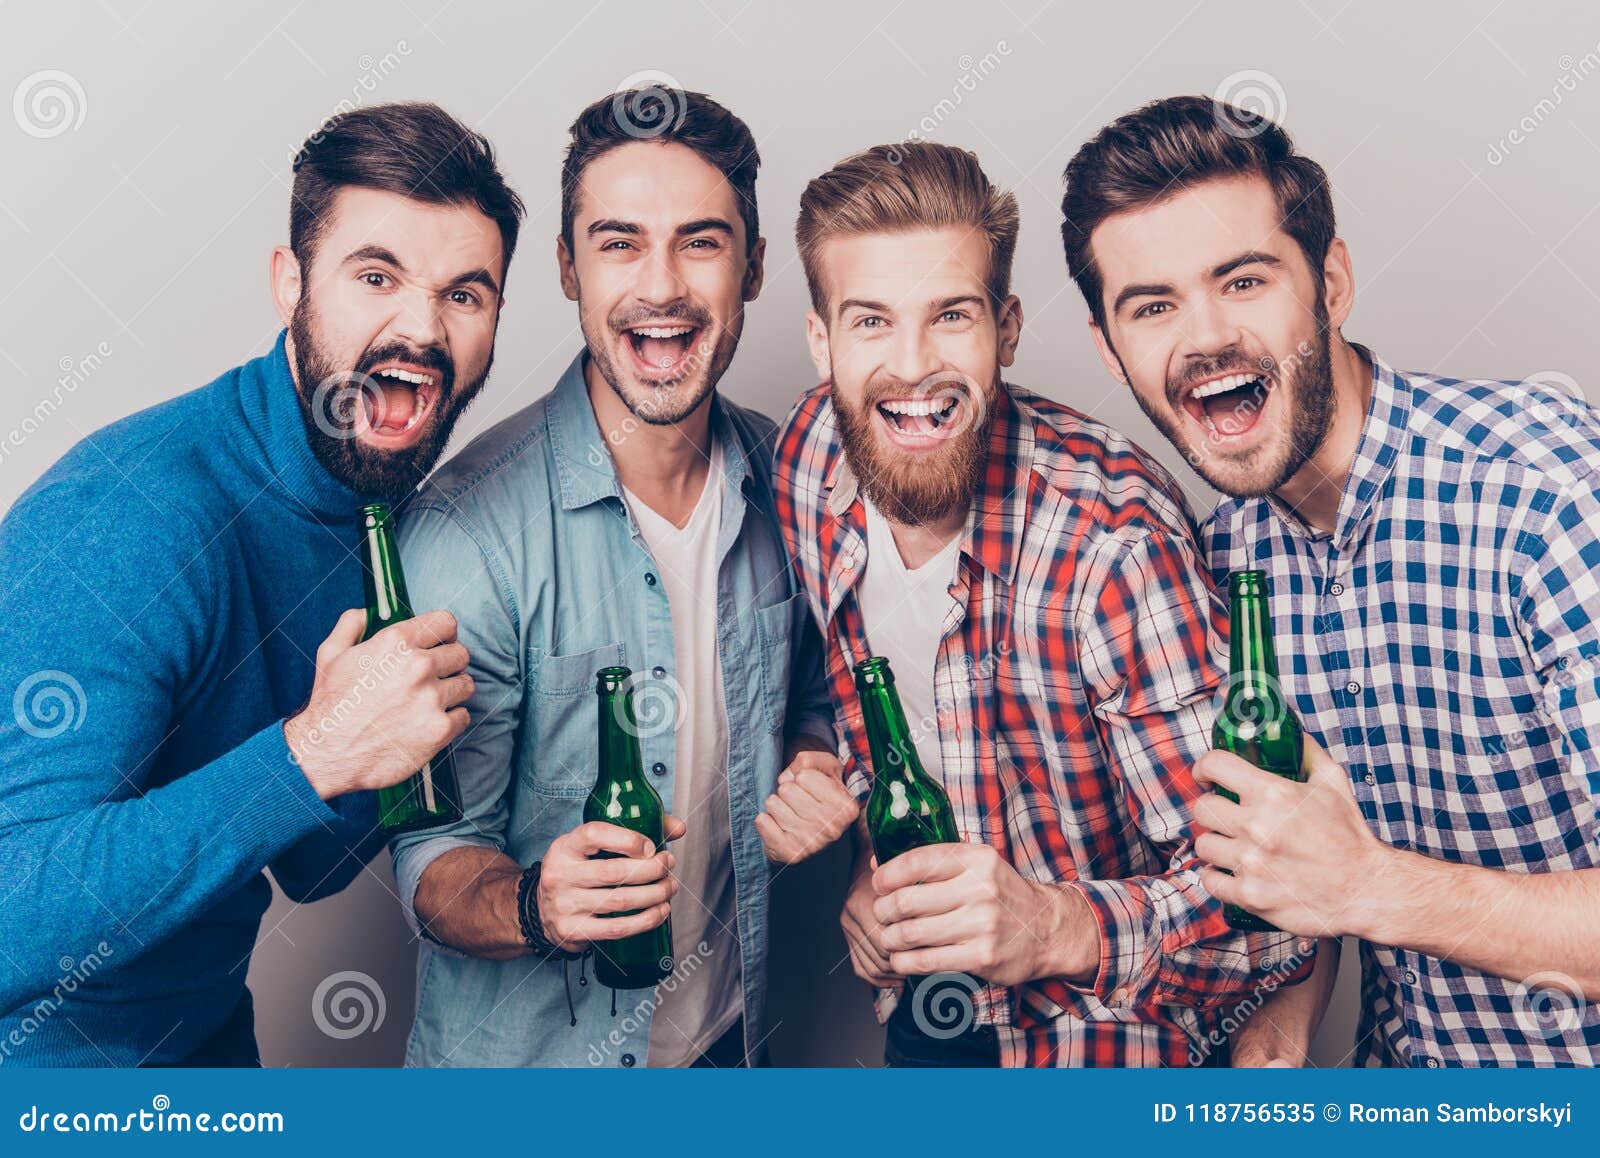 Men`s Club. Four Crazy Friends Guys are Screaming with Bottles I ...